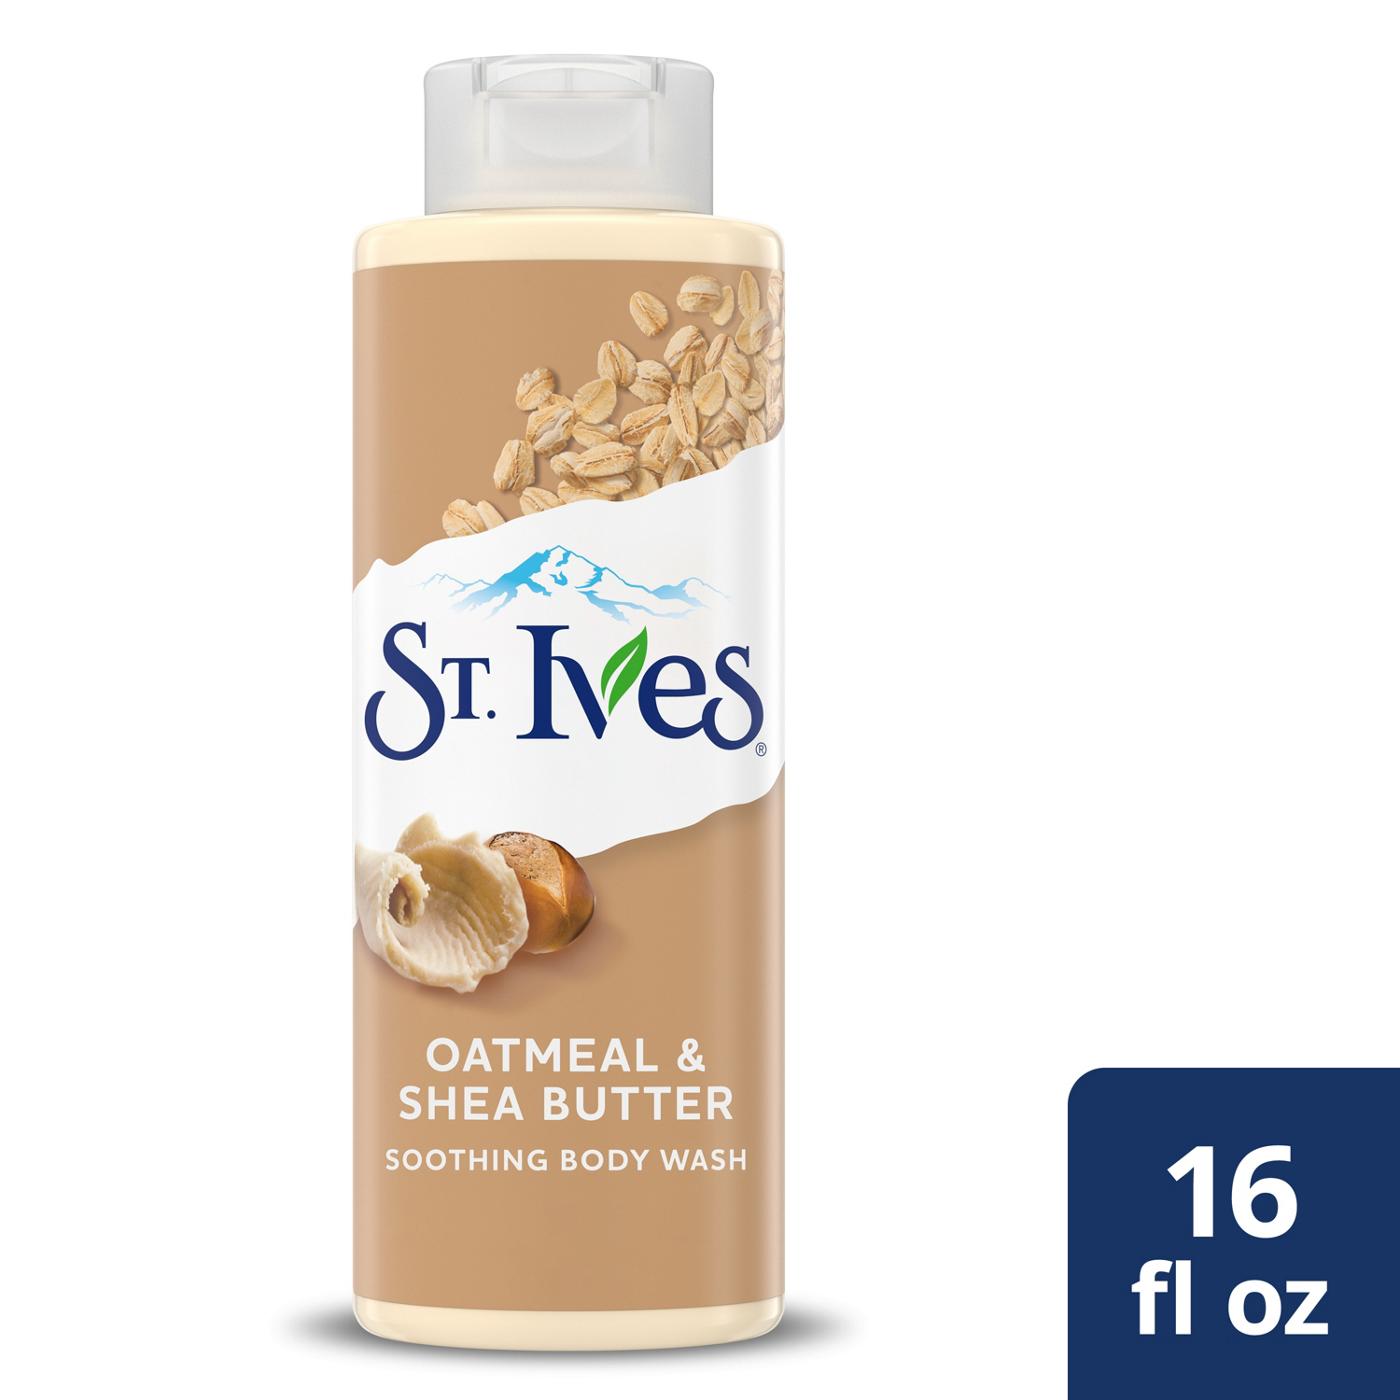 St. Ives Soothing Body Wash - Oatmeal & Shea Butter; image 2 of 4